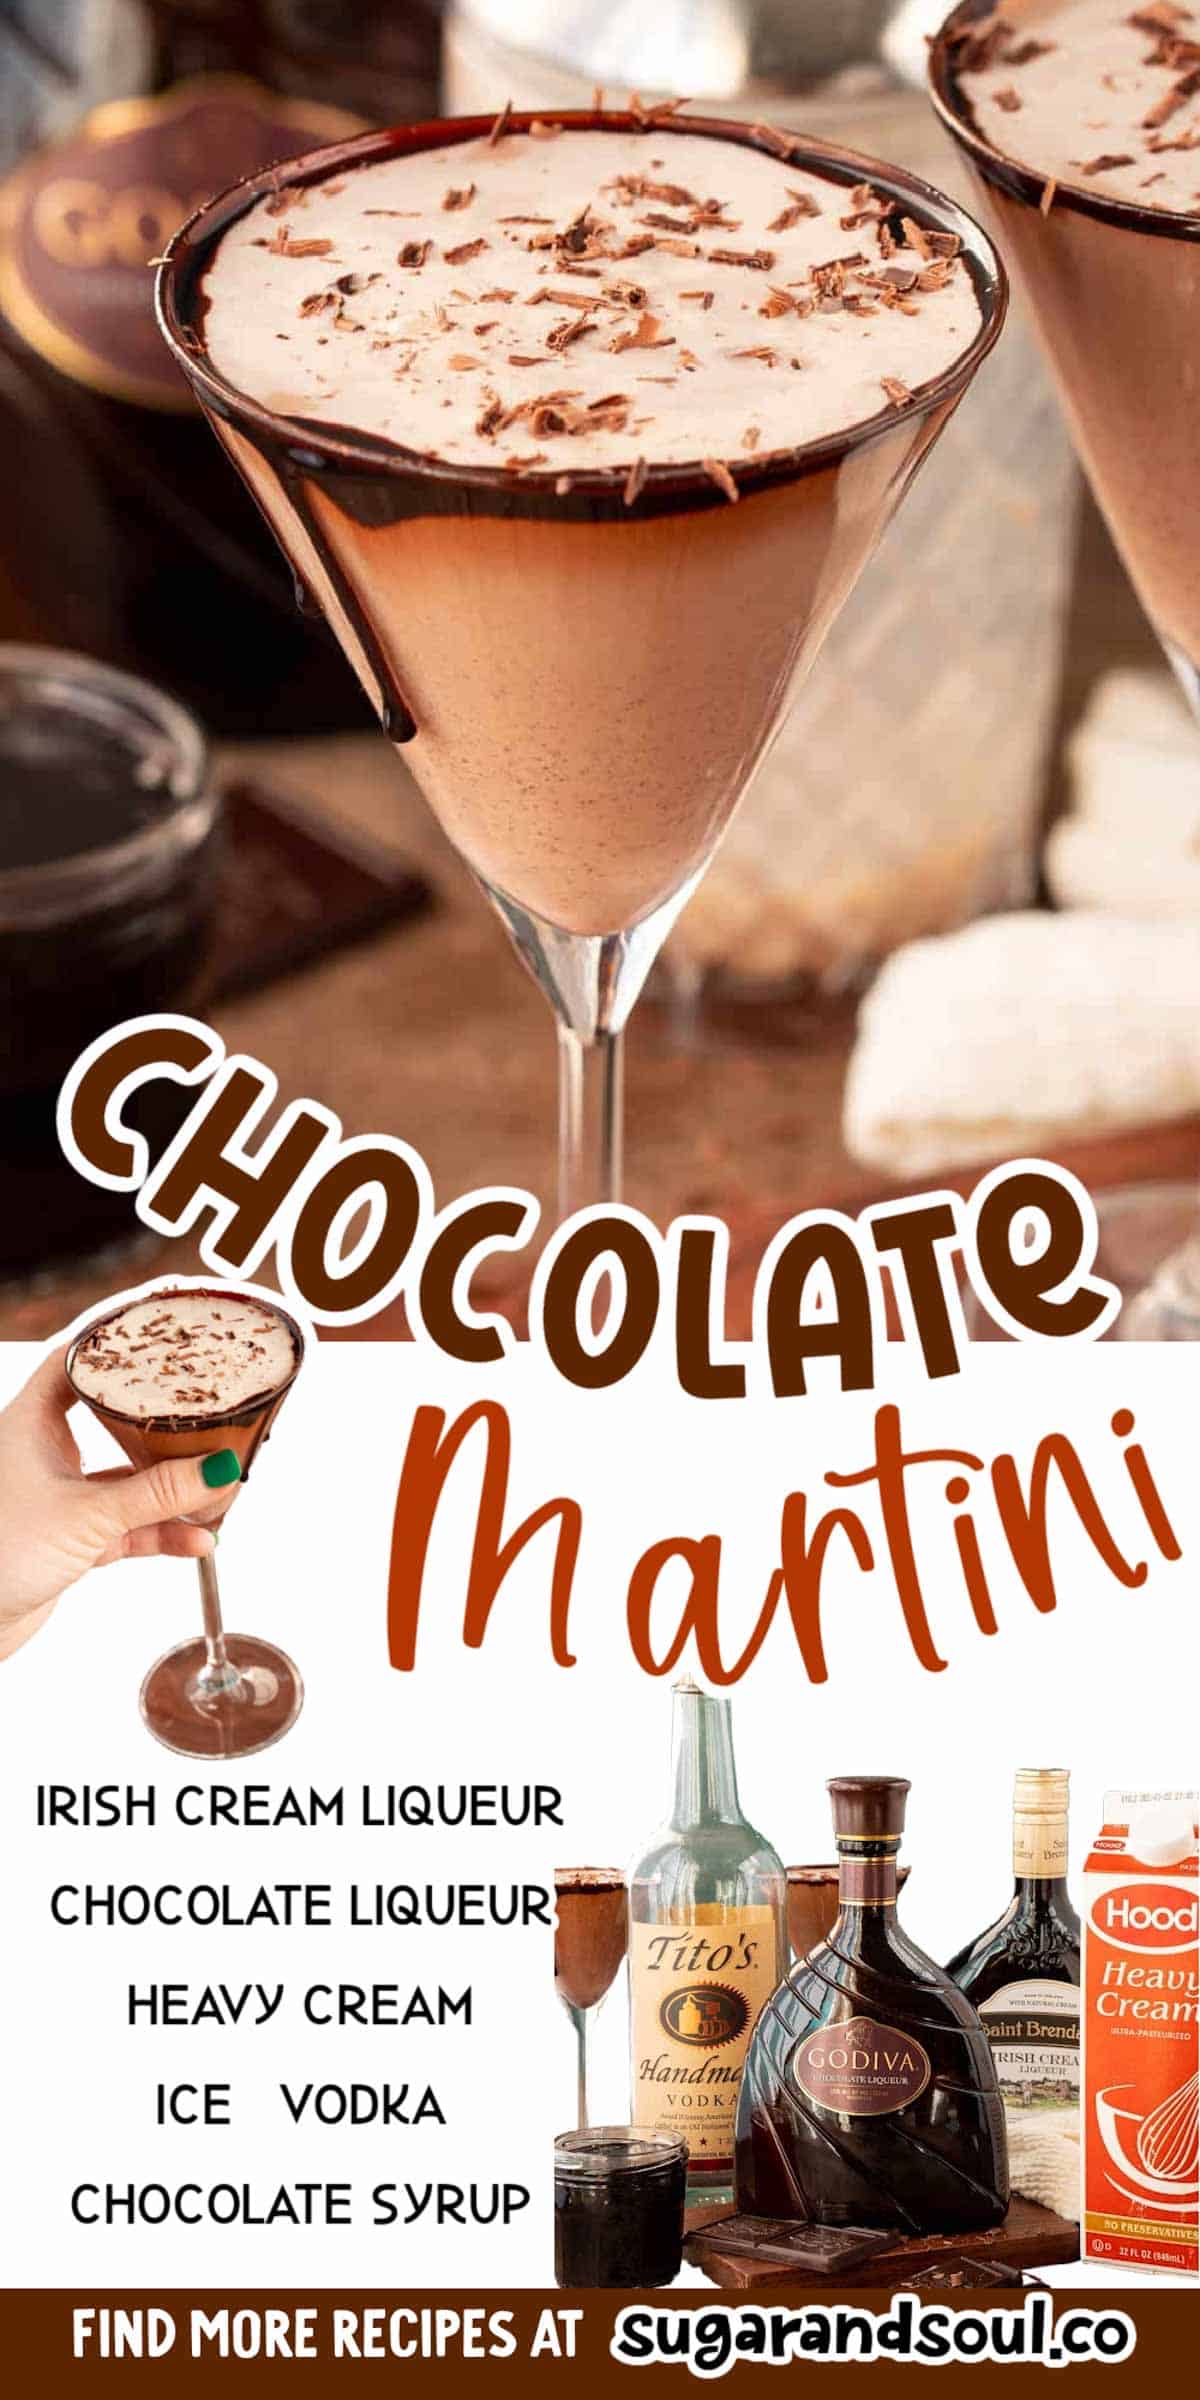 This Chocolate Martini is a sweet, creamy cocktail that combines chocolate syrup and heavy cream with three different types of alcohol! A great drink choice for chocolate lovers! via @sugarandsoulco